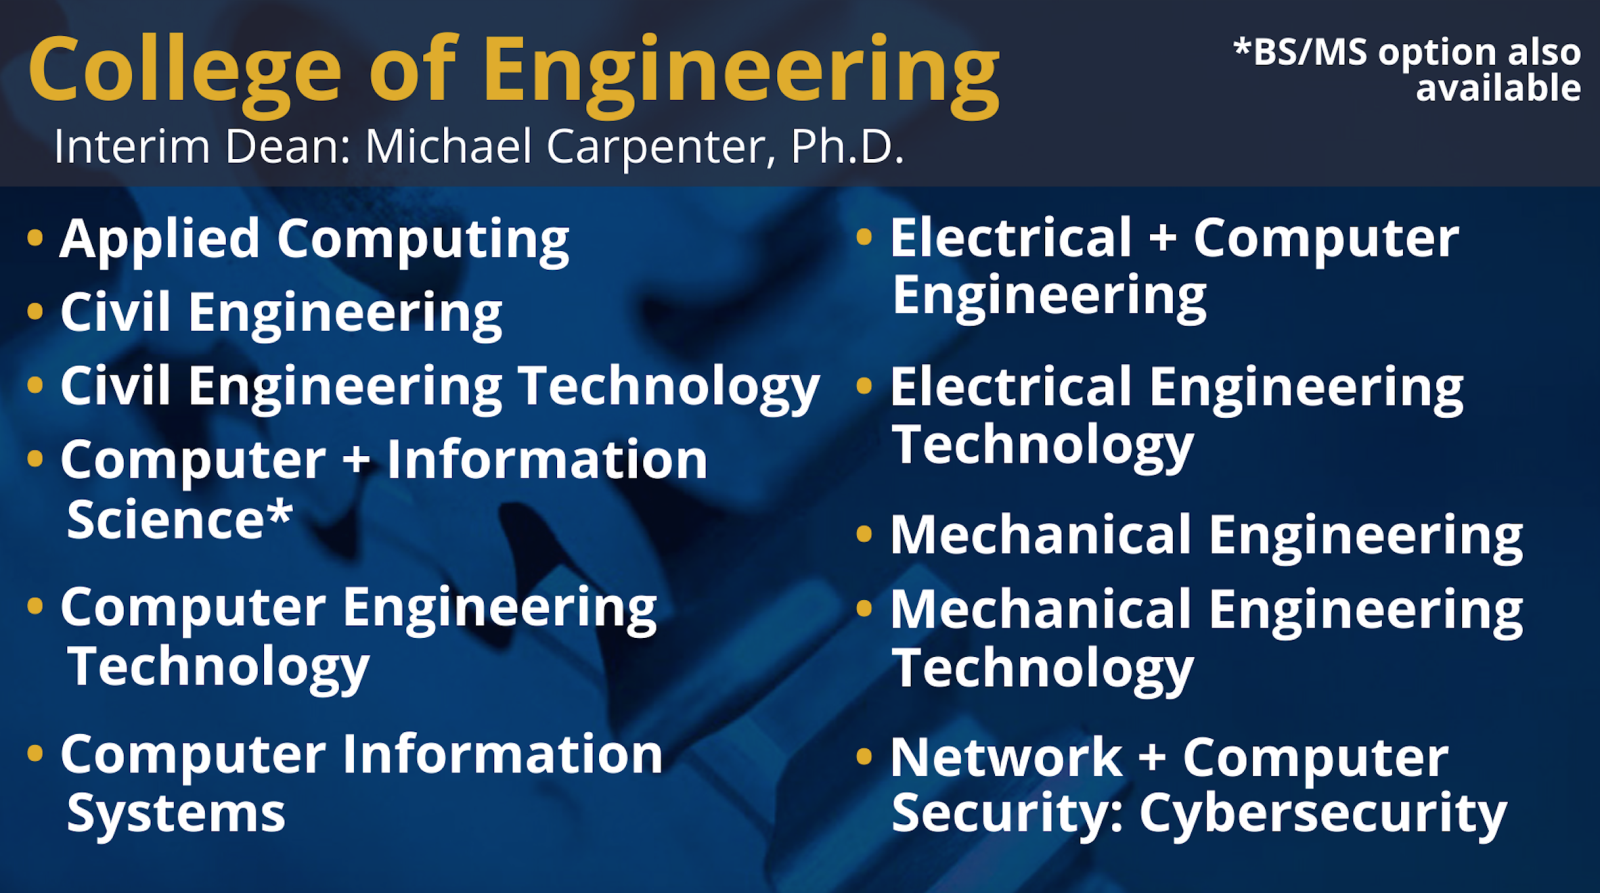 College of Engineering - Interim Dean: Michael Carpenter, Ph.D. - Applied Computing, Civil Engineering, Civil Engineering Technology, Computer + Information Science*, Computer Engineering Technology, Electrical + Computer Engineering, Electrical Engineering Technology, Mechanical Engineering, Mechanical Engineering Technology, Network+Computer Security: Cybersecurity - *BS/MS option also available